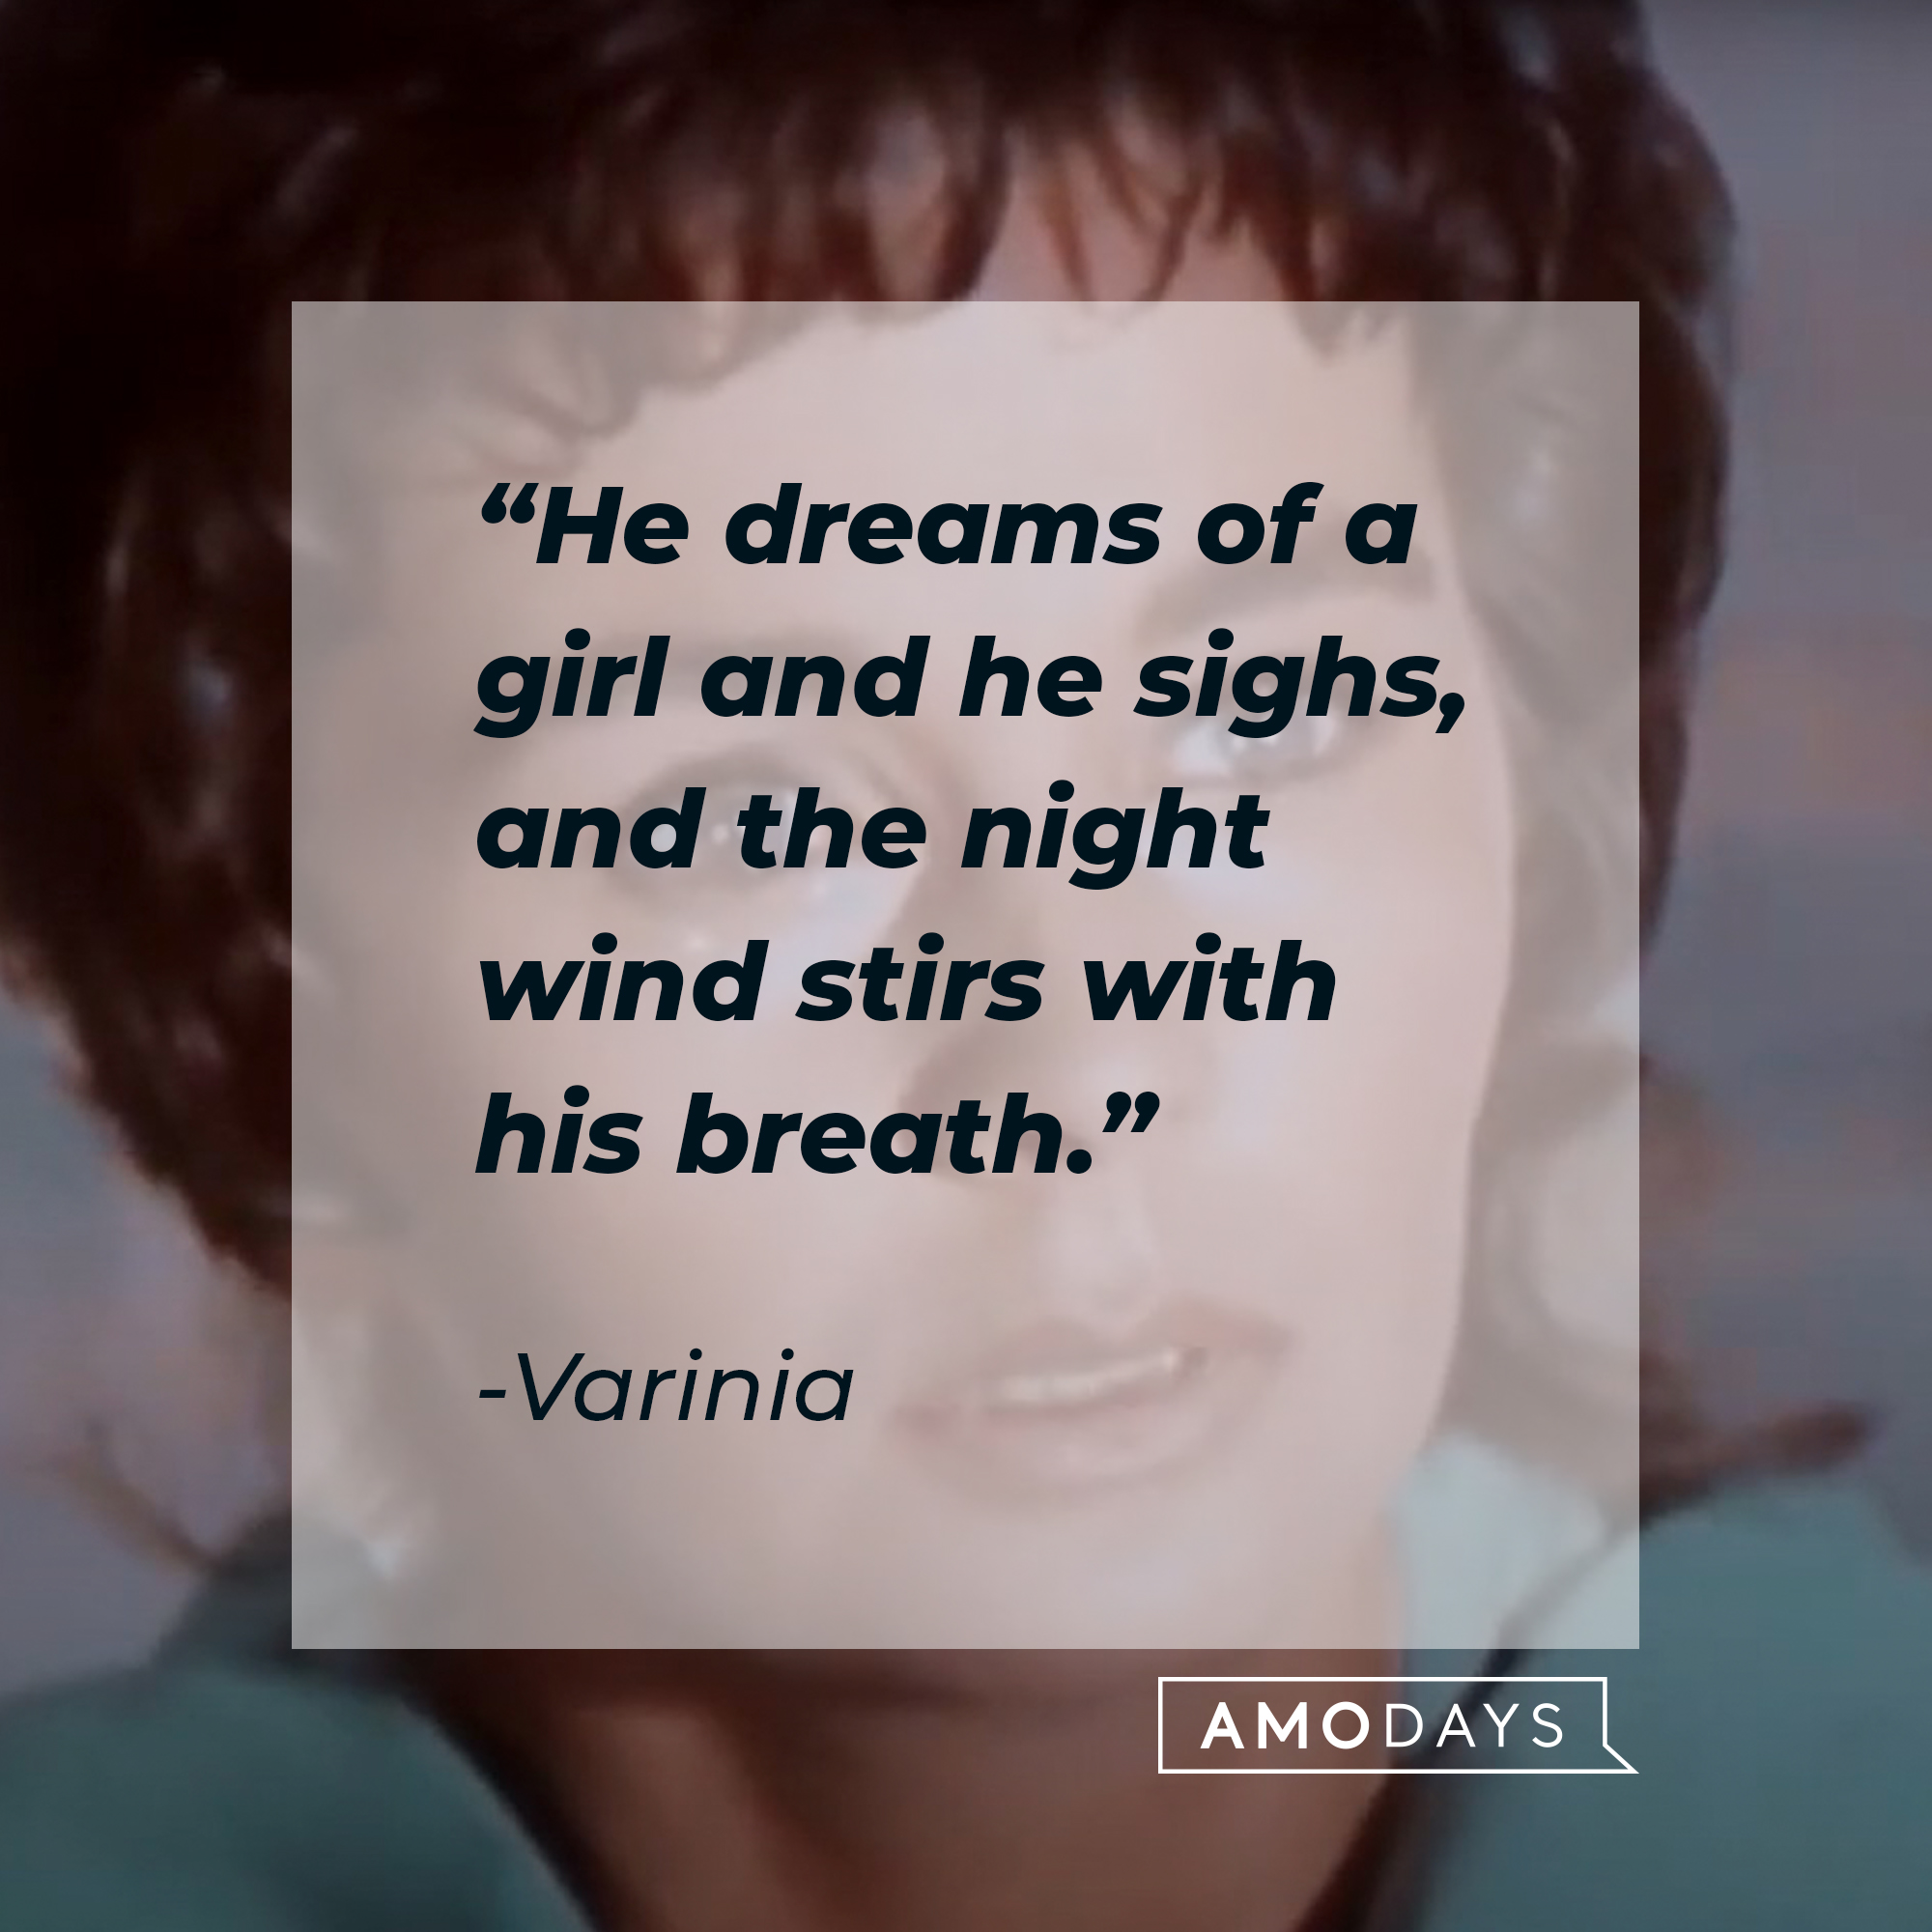 An image of the character Varinia with her quote: "He dreams of a girl and he sighs, and the night wind stirs with his breath." | Source: youtube.com/Starz